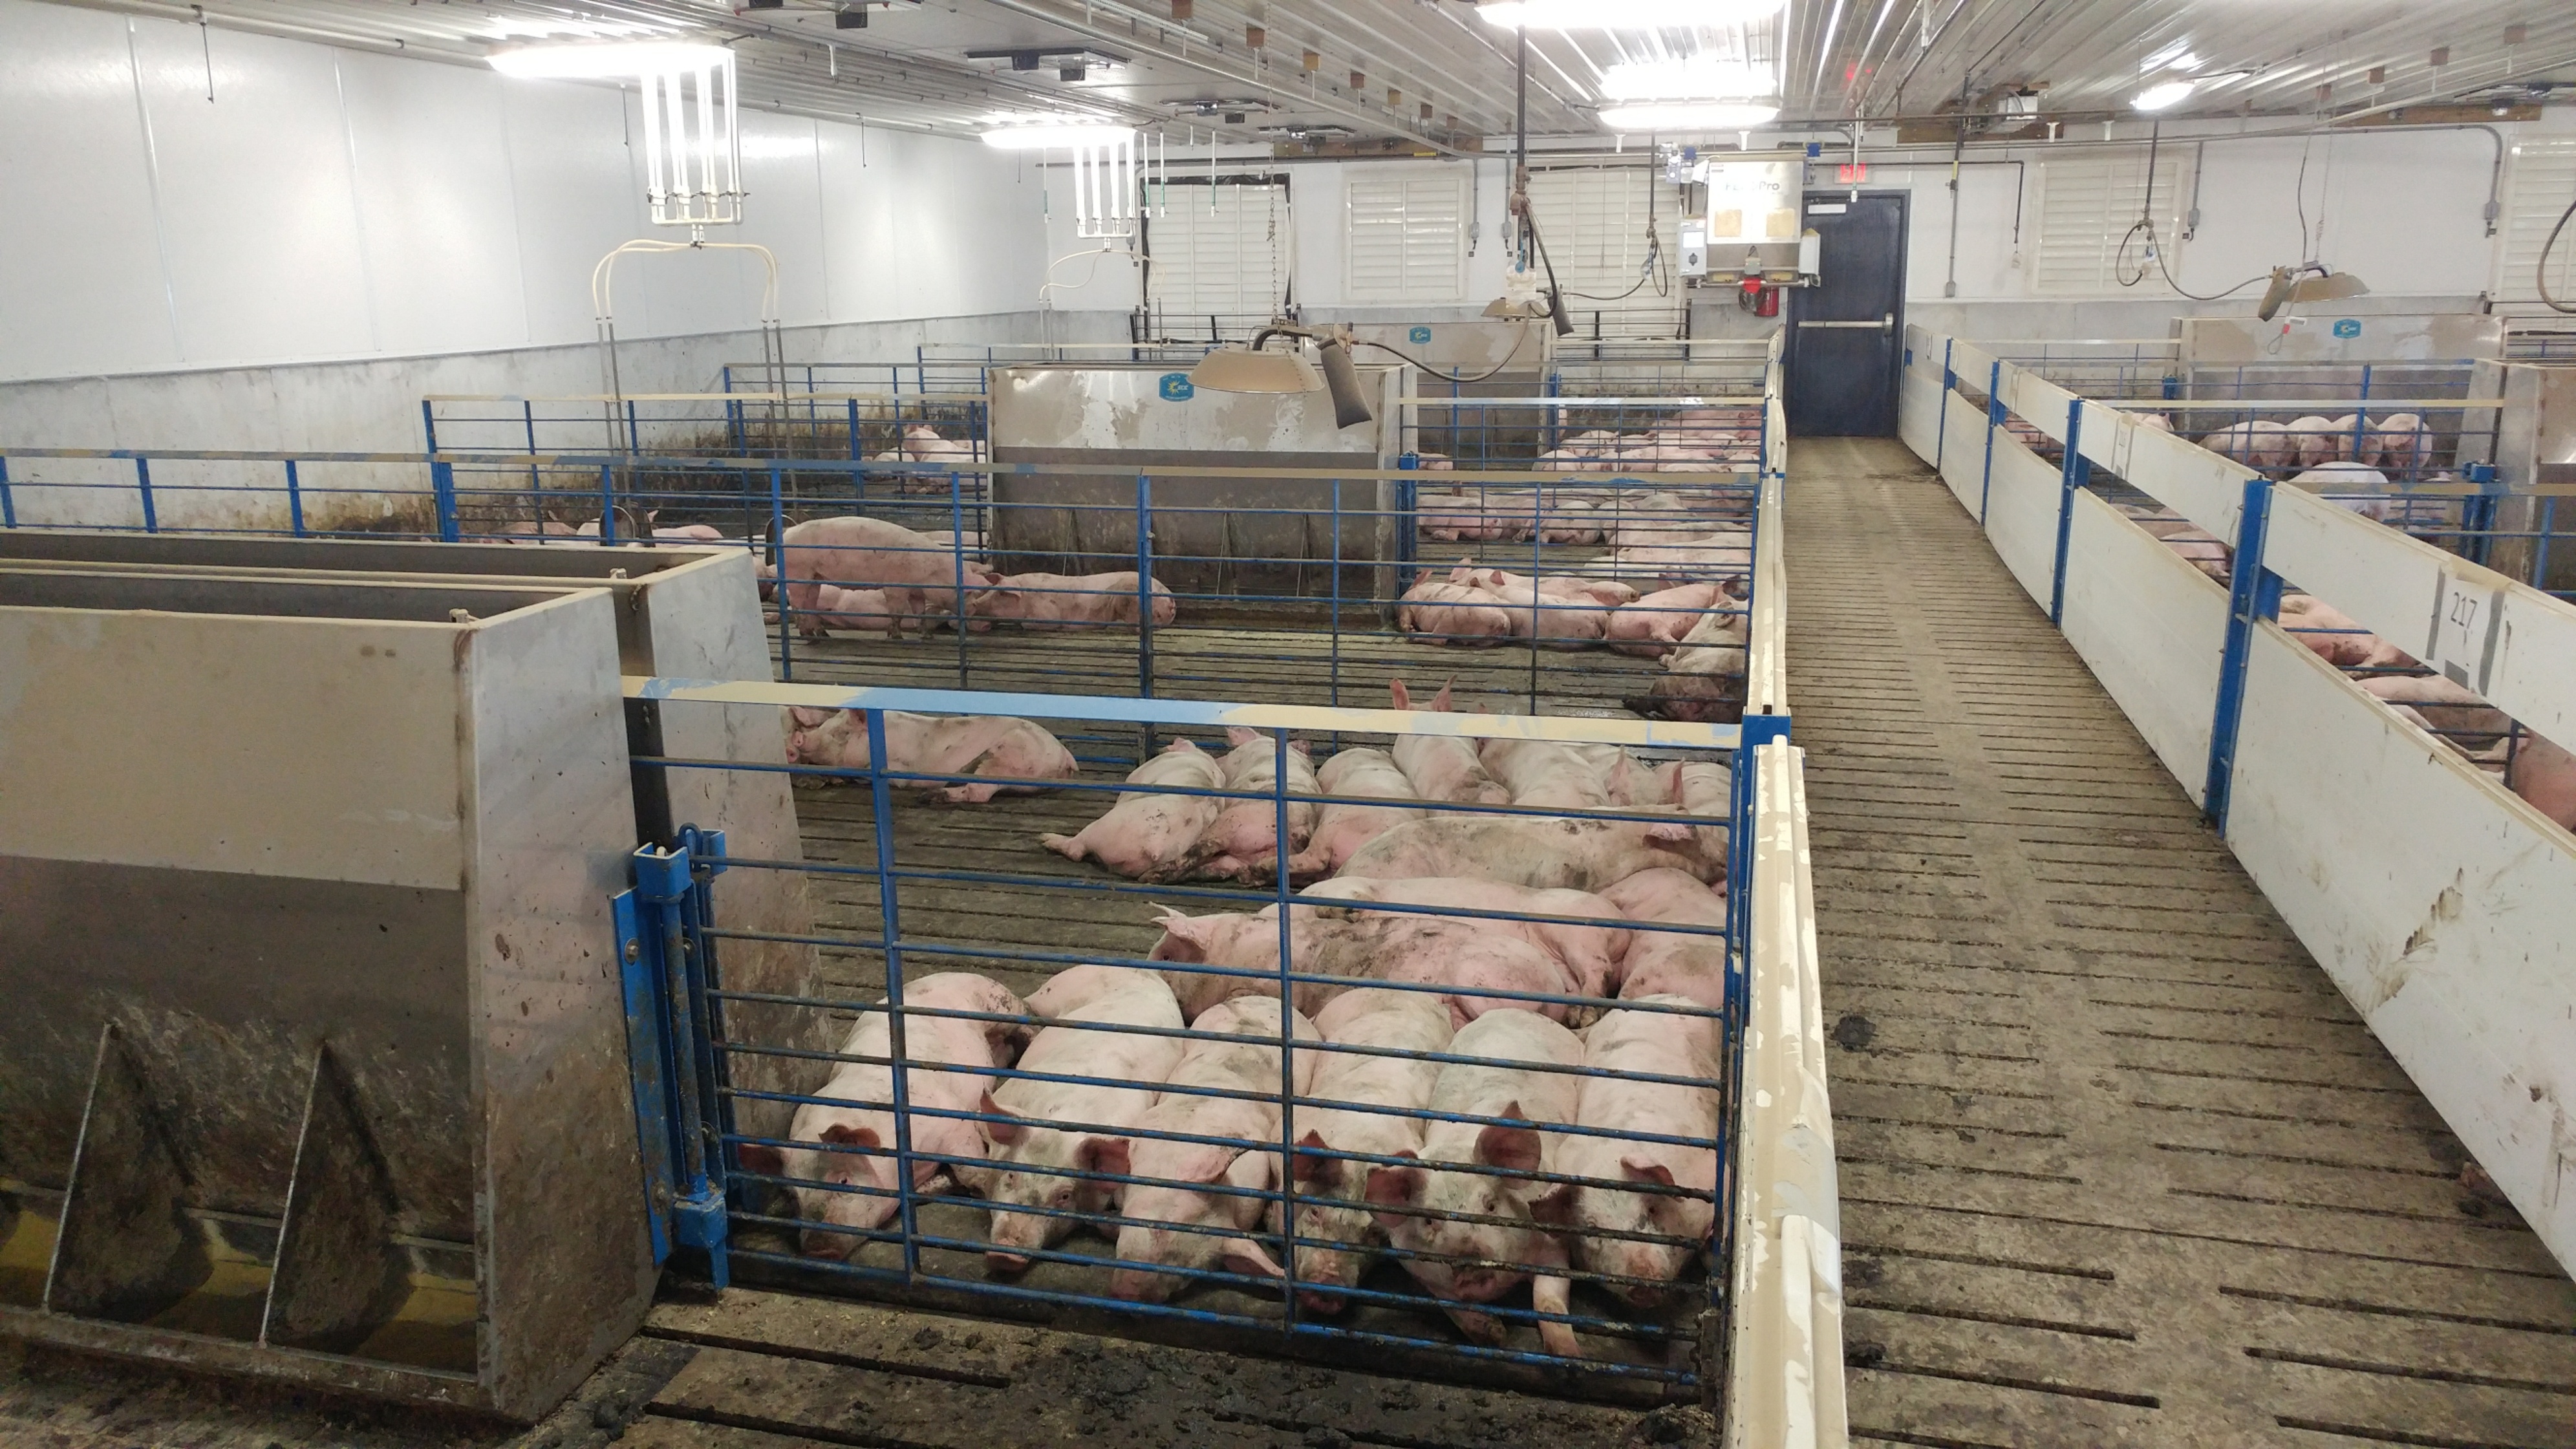 A group of matureing swine in a group pen.